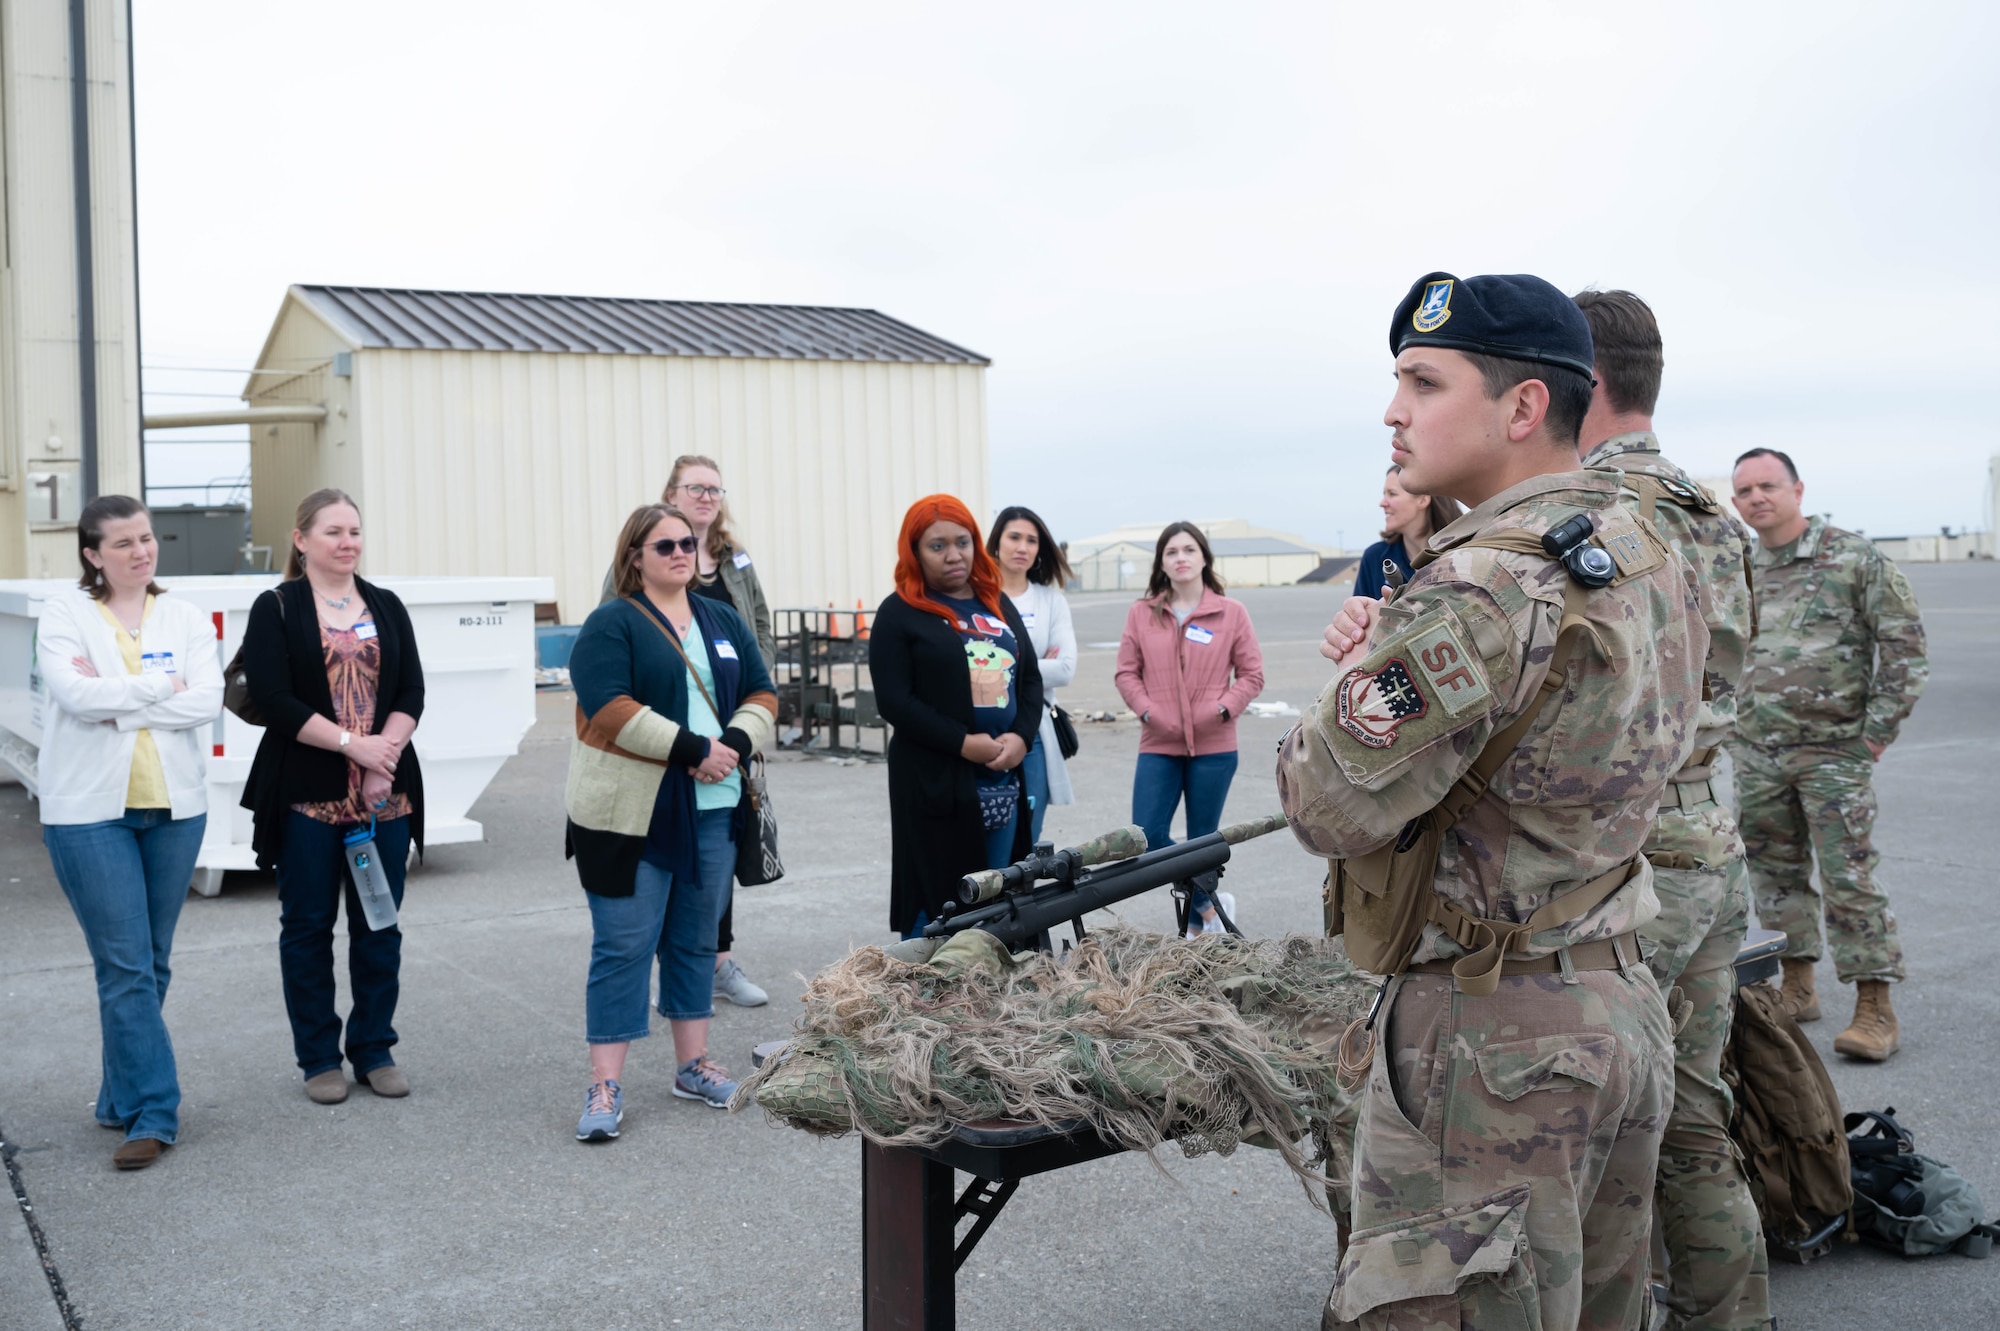 Airmen with the 341st Missile Security Operations Squadron Tactical Response Force explain the different weapons and equipment used by their squadron during a tour May 7, 2021, at Malmstrom Air Force Base, Mont.